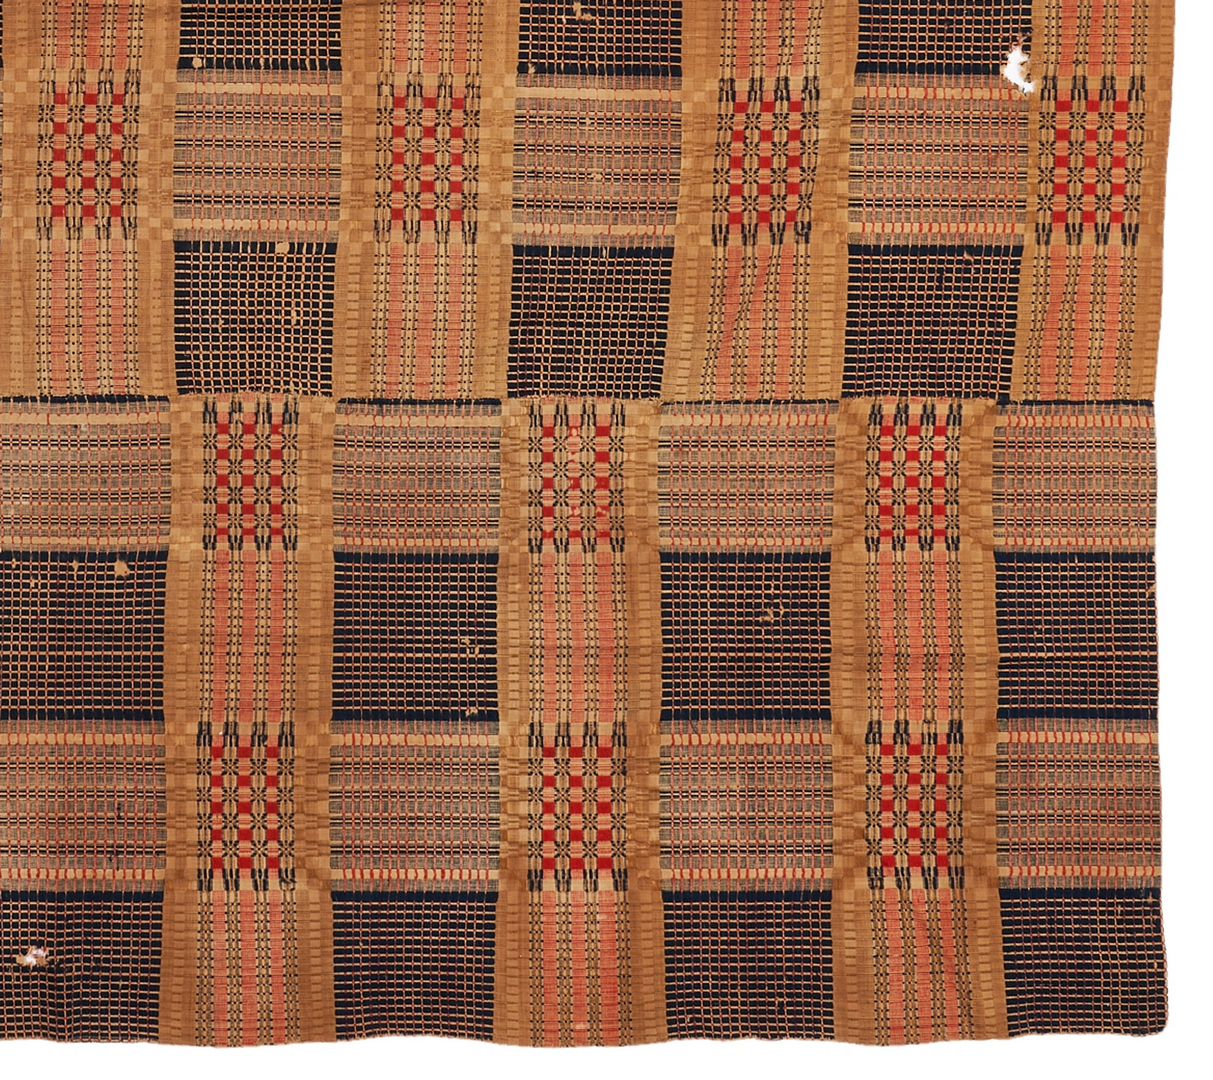 Lot 1143: Group of 3 Southern Overshot Coverlets